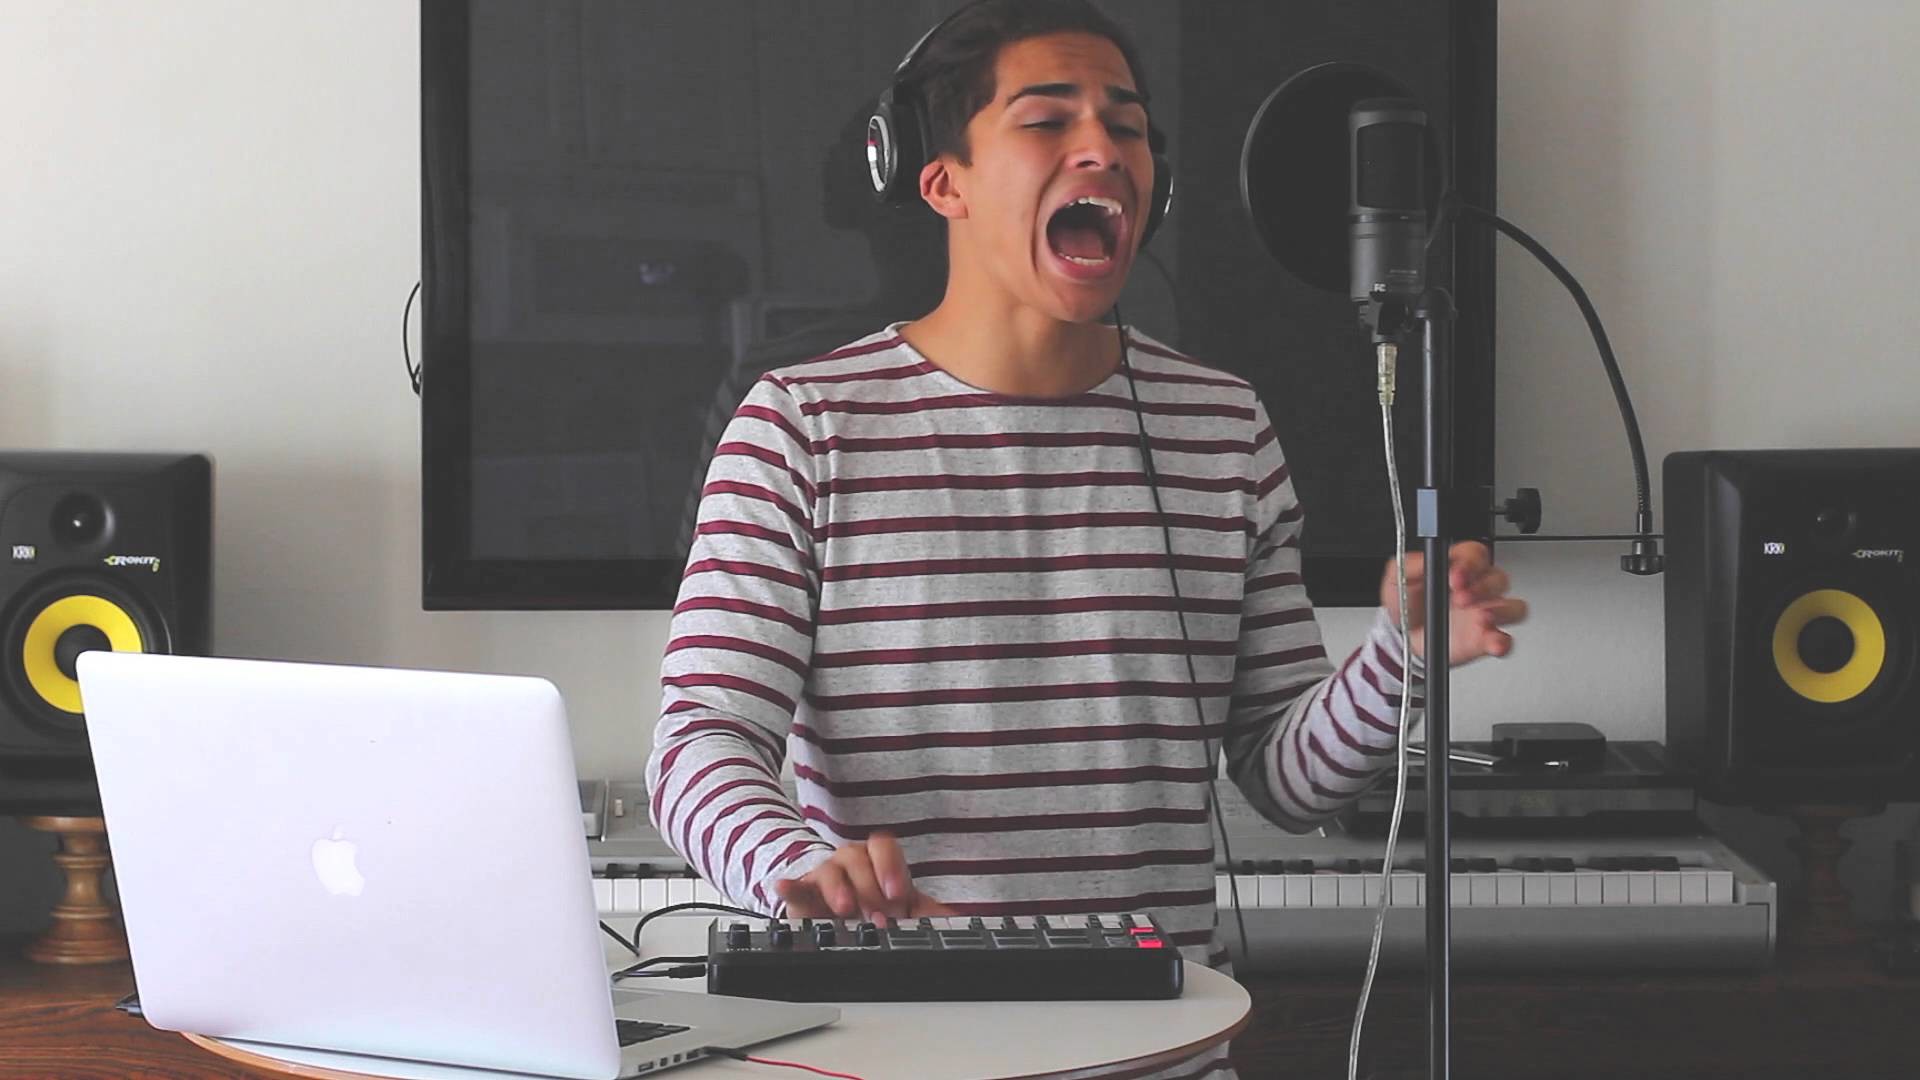 Me Myself and I by G Eazy | Cover by Alex Aiono